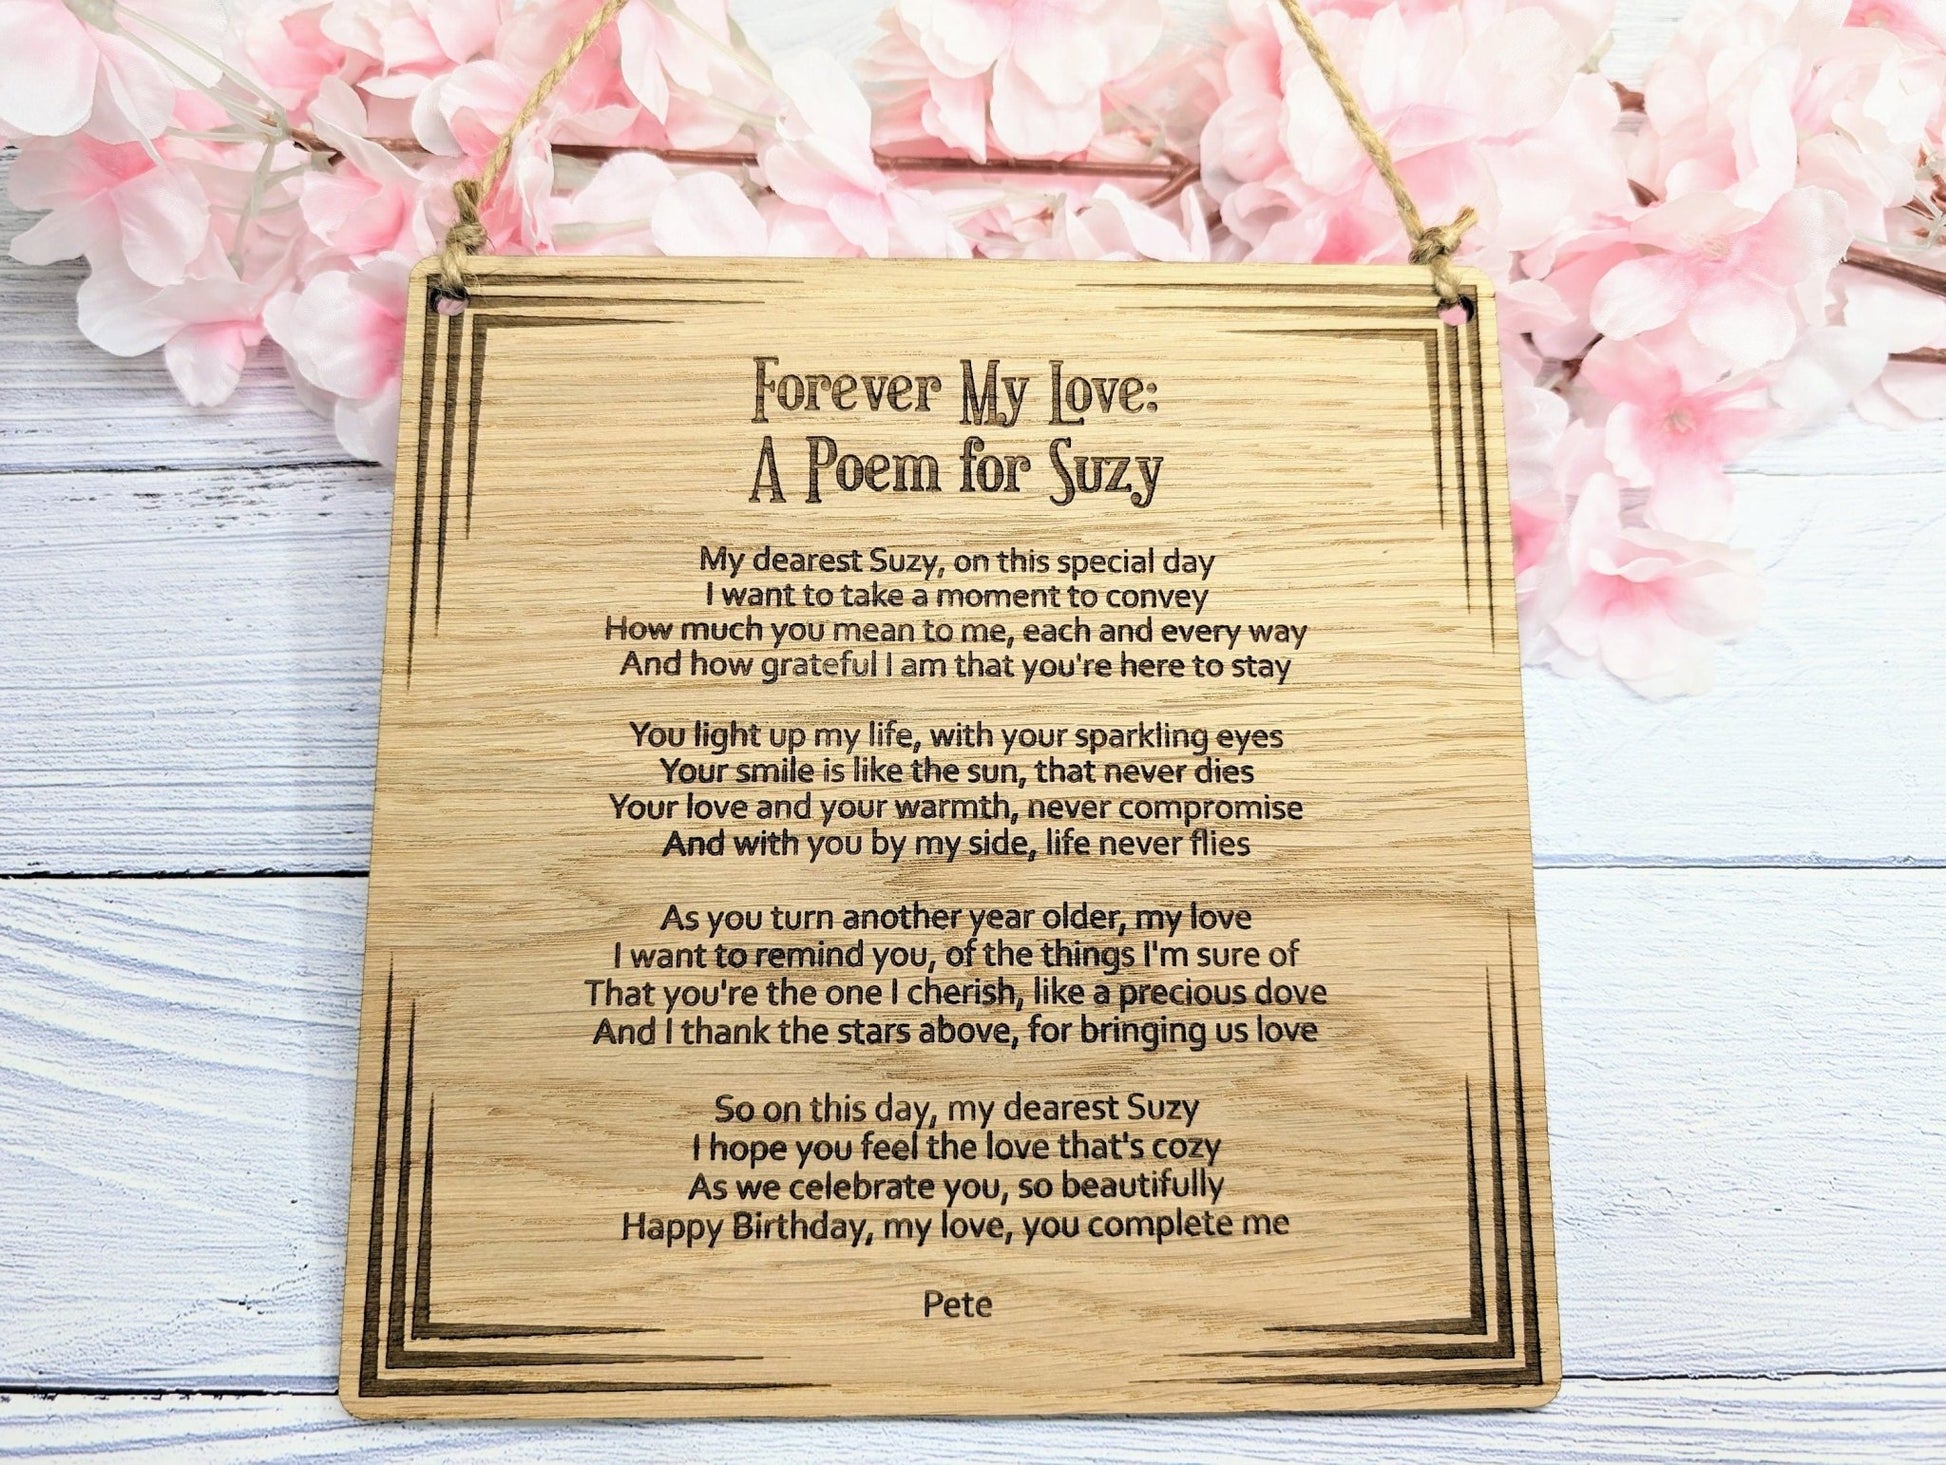 Custom Engraved Poem & Message Sign | Oak Veneer MDF | Personalised Wall Art | Thoughtful Home and Office Decor | Eco-Friendly Design - CherryGroveCraft